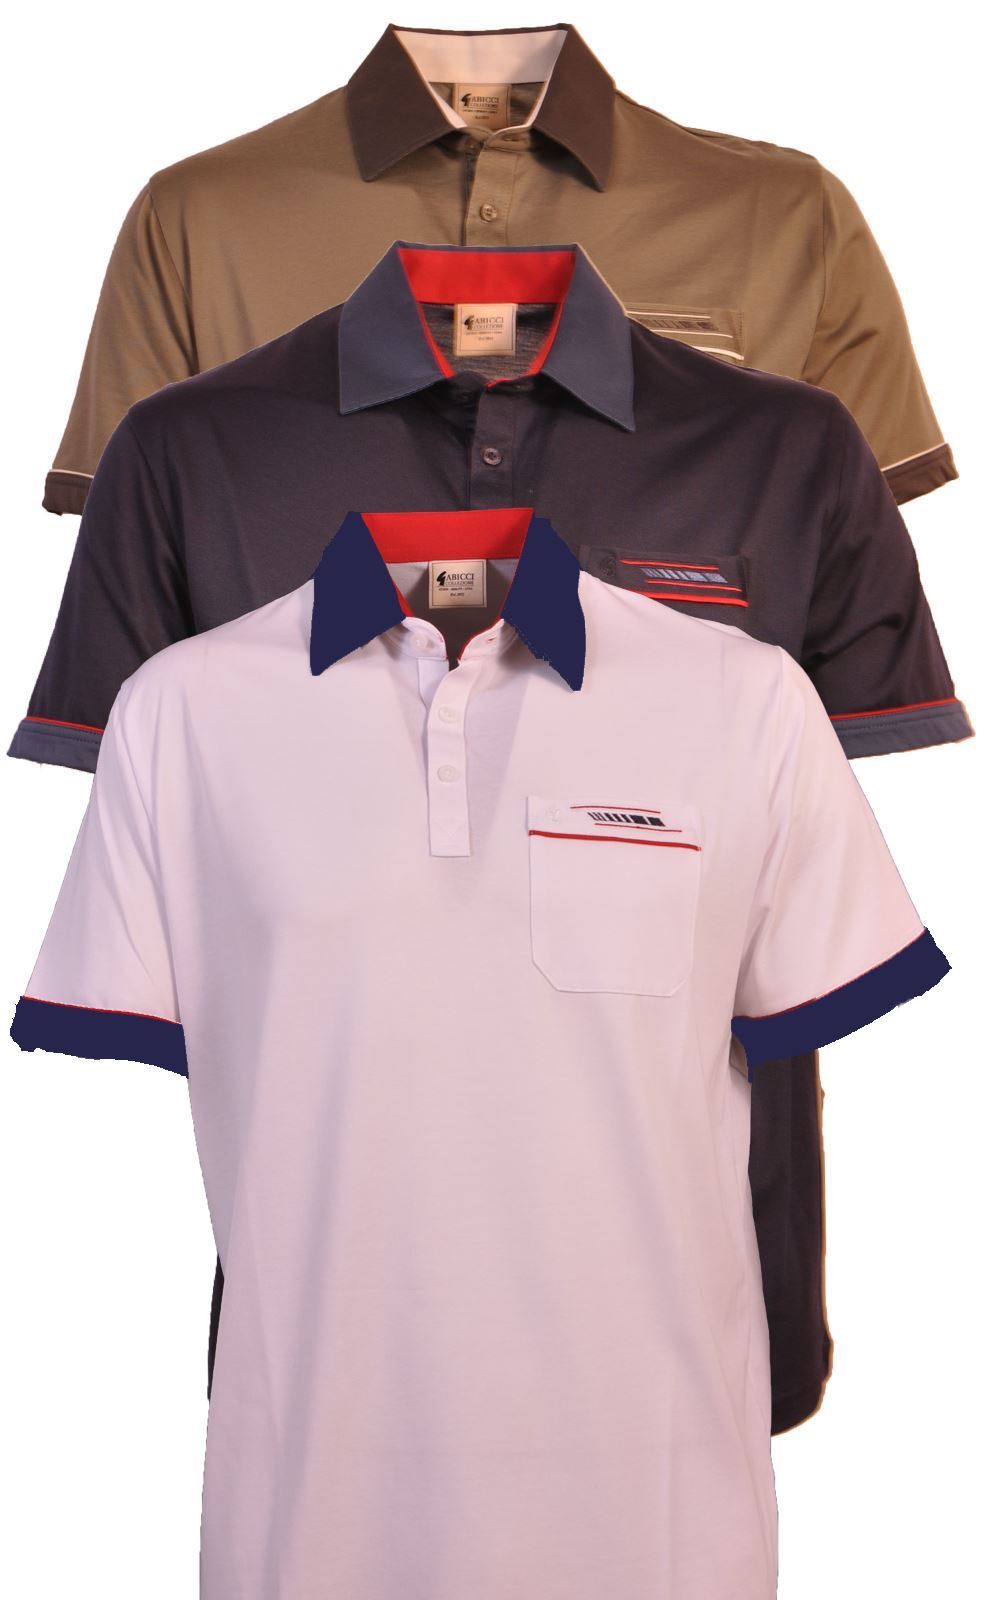 Picture of Gabicci Polo Shirt GOOX62